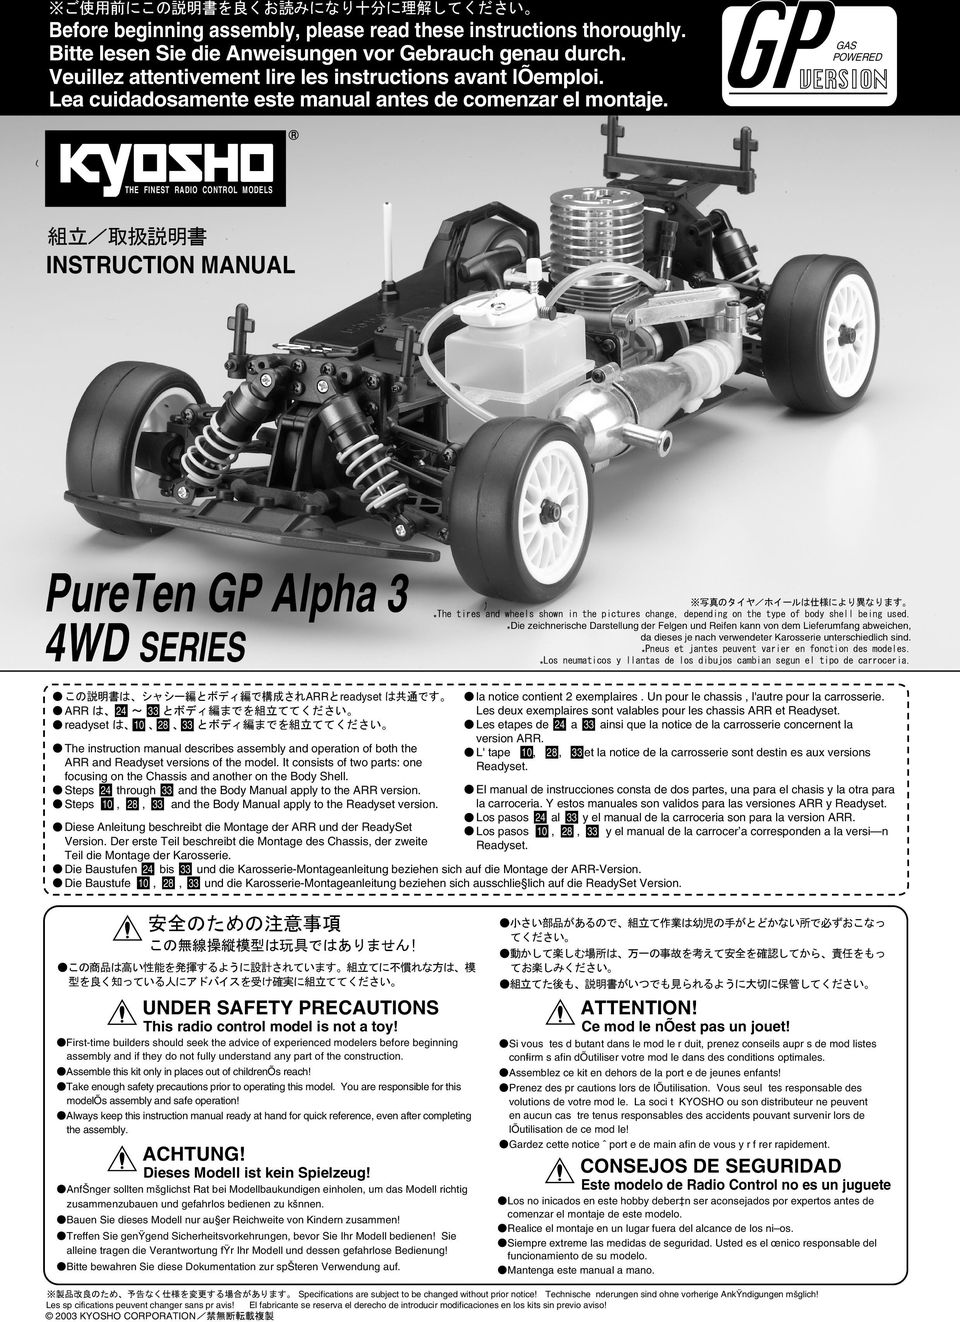 GAS POWERED R THE FINEST RADIO CONTROL MODELS 組立 取扱説明書 INSTRUCTION MANUAL PureTen GP Alpha WD SERIES 写真のタイヤ ホイールは仕様により異なります *The tires and wheels shown in the pictures change, depending on the type